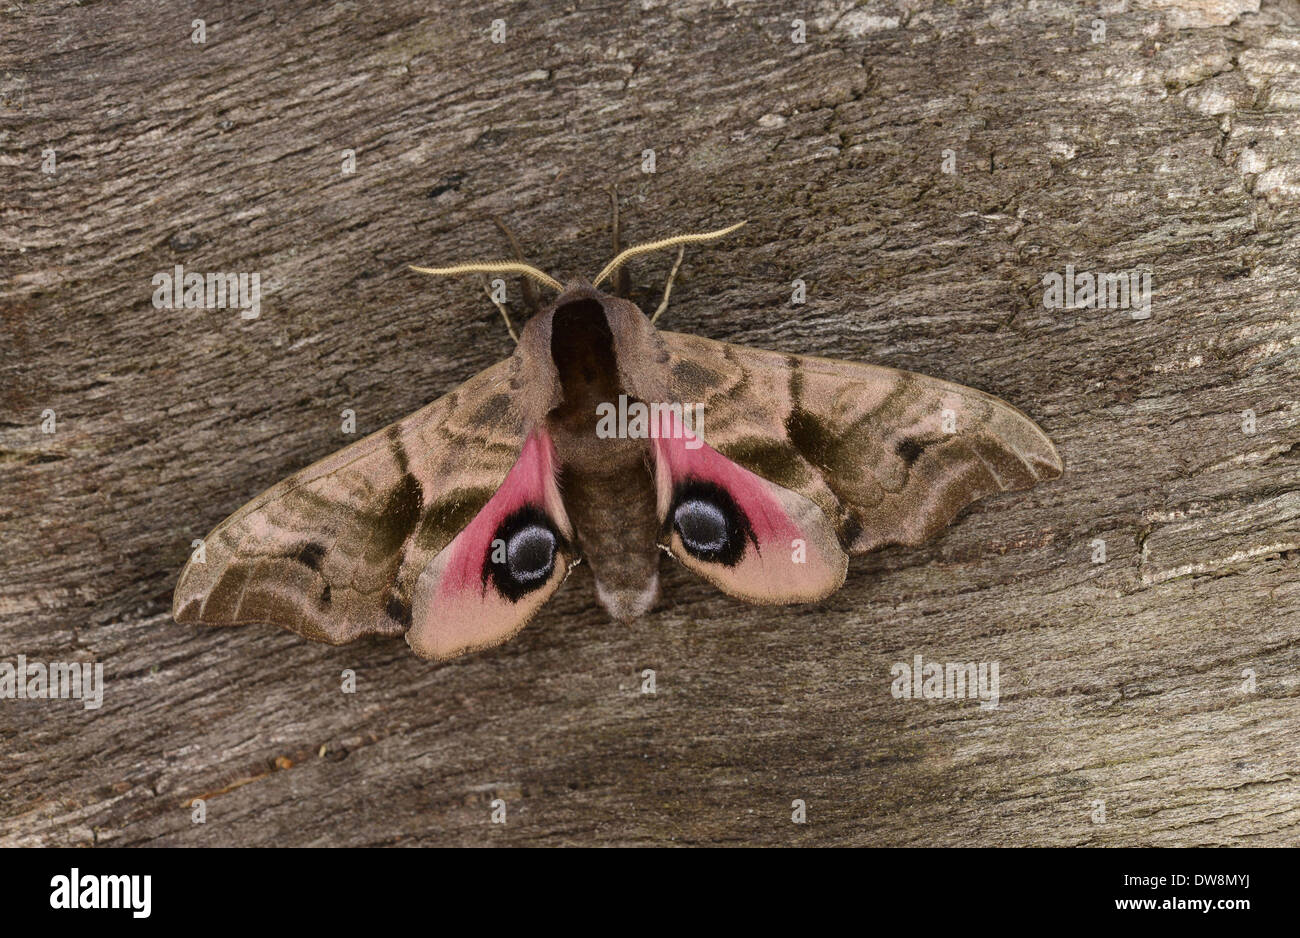 Eyed Hawkmoth (Smerinthus ocellata) adult showing eyespots on rear wings resting on bark Oxfordshire England July Stock Photo